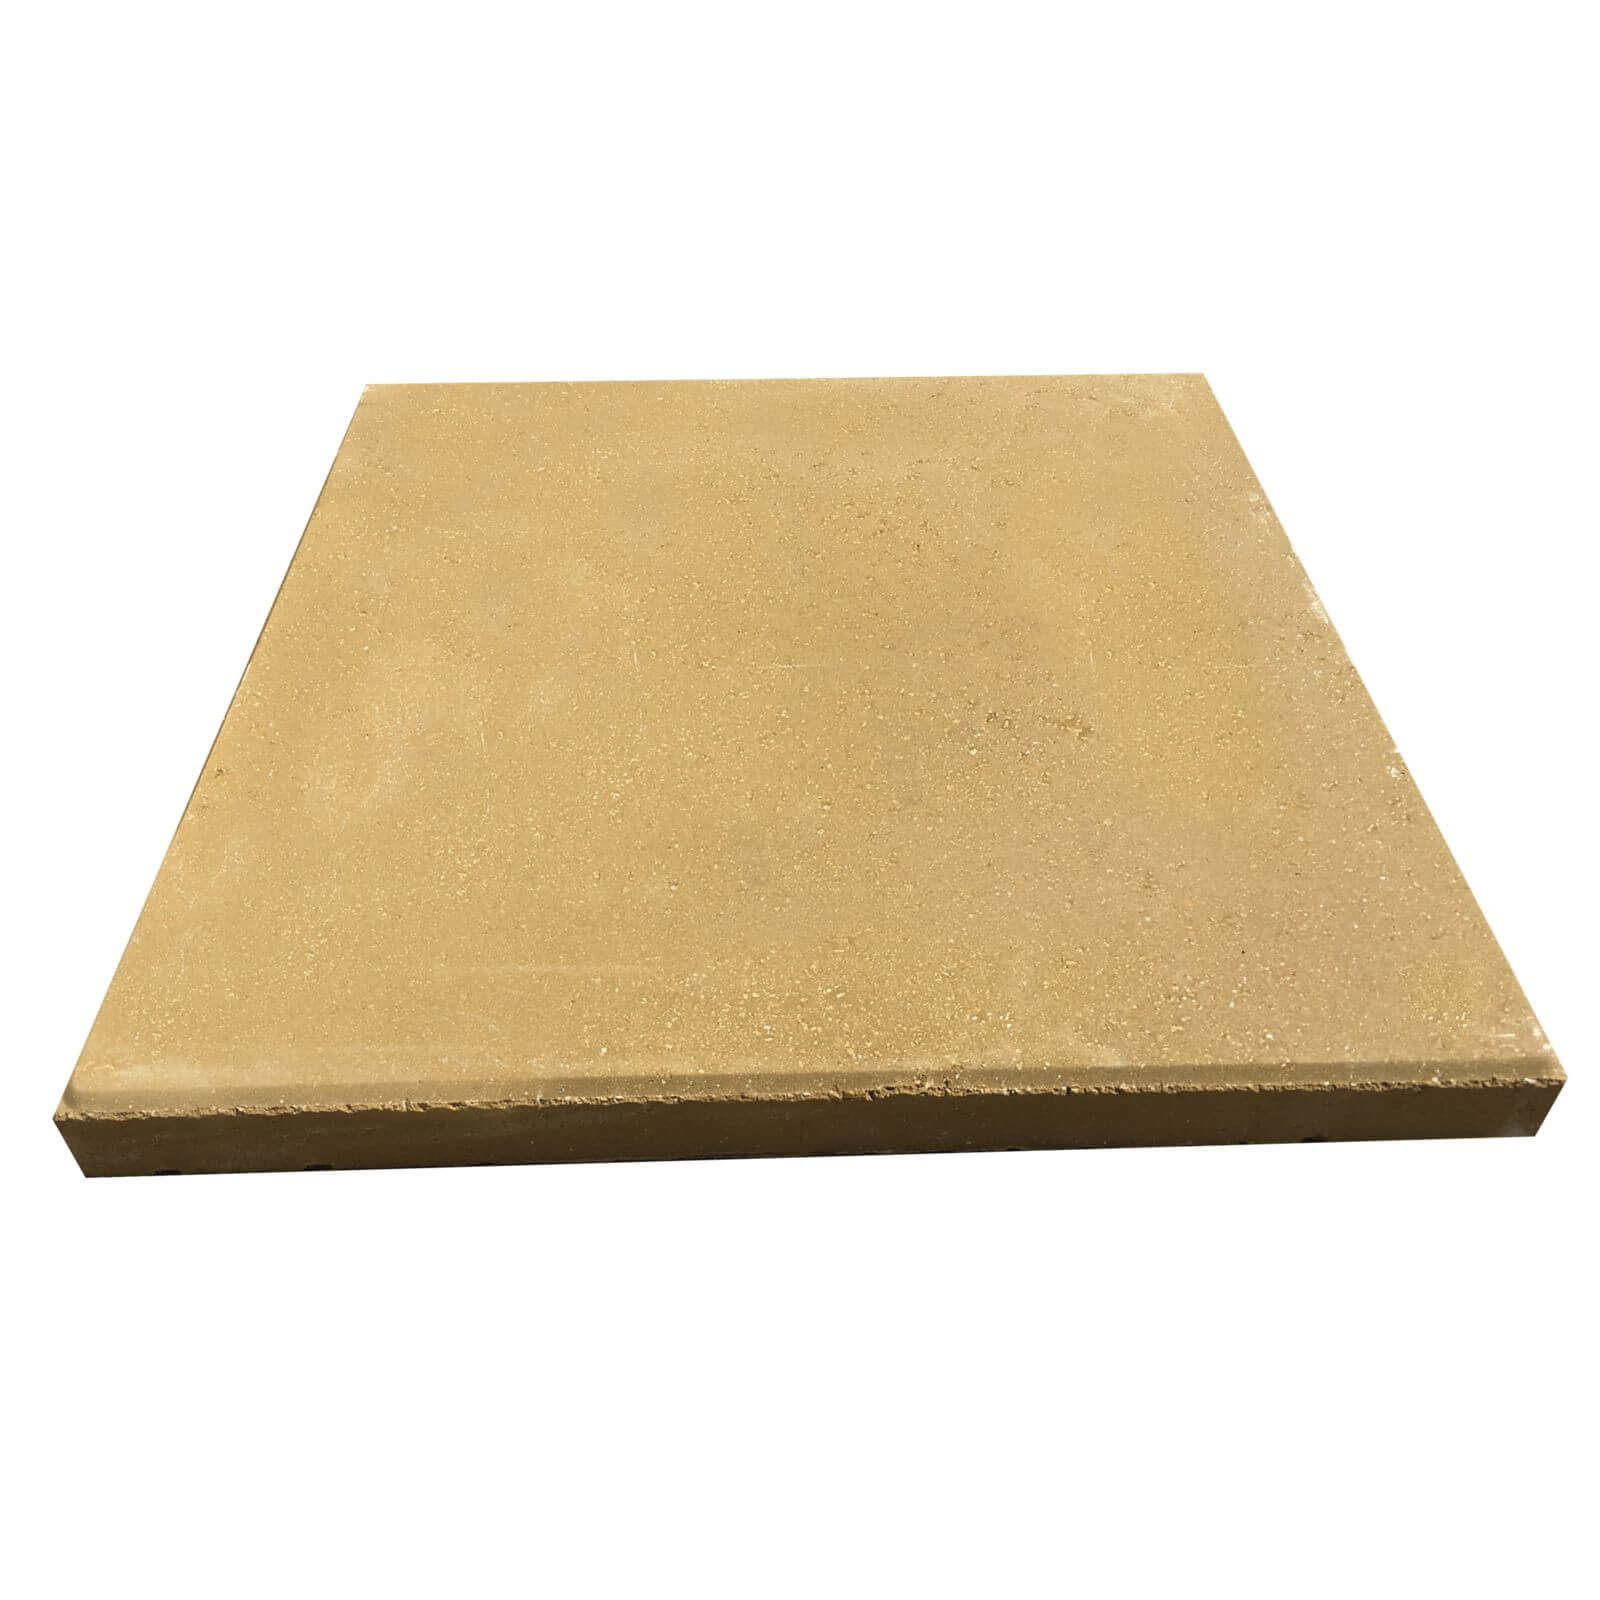 Stylish Stone Hereford Paving Smooth 450 x 450mm Gold - Full Pack of 60 Slabs